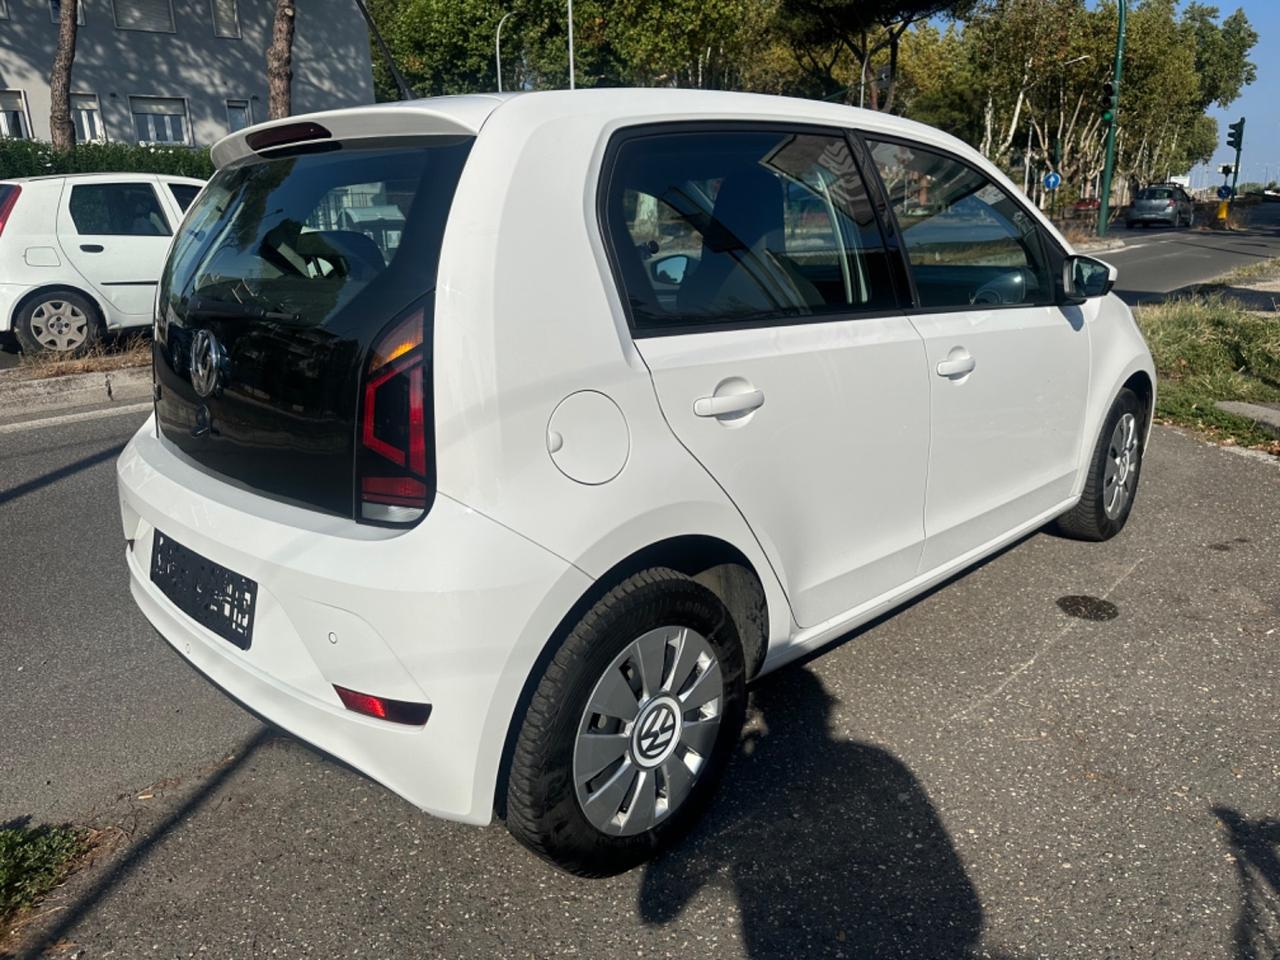 Volkswagen up! 1.0 75 CV 5p. move up! Clima Pdc